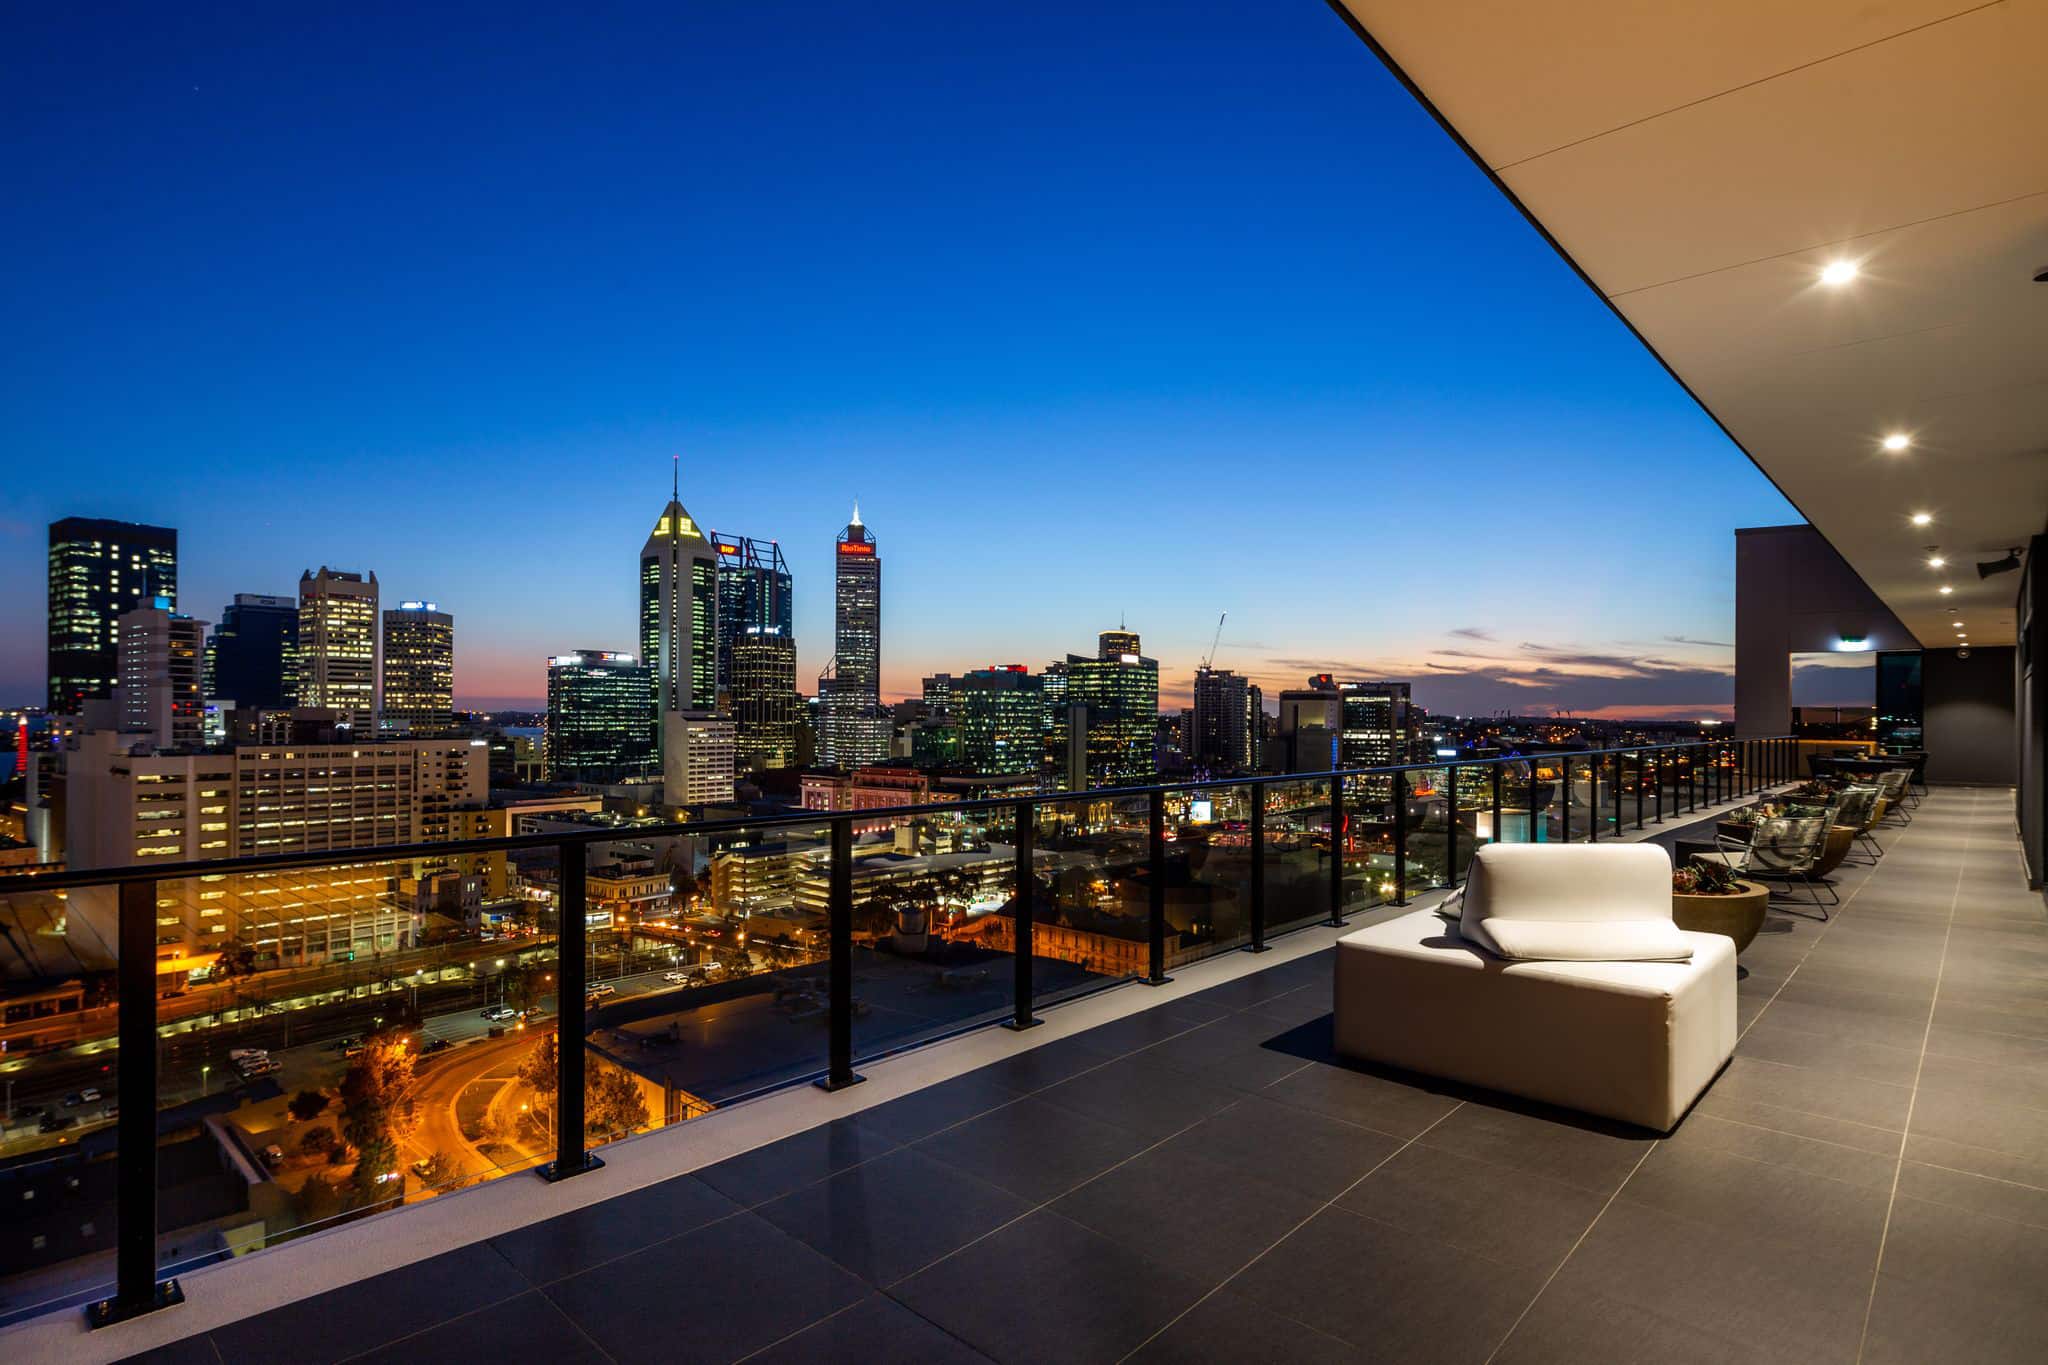 Views from Verdant Apartments over Perth